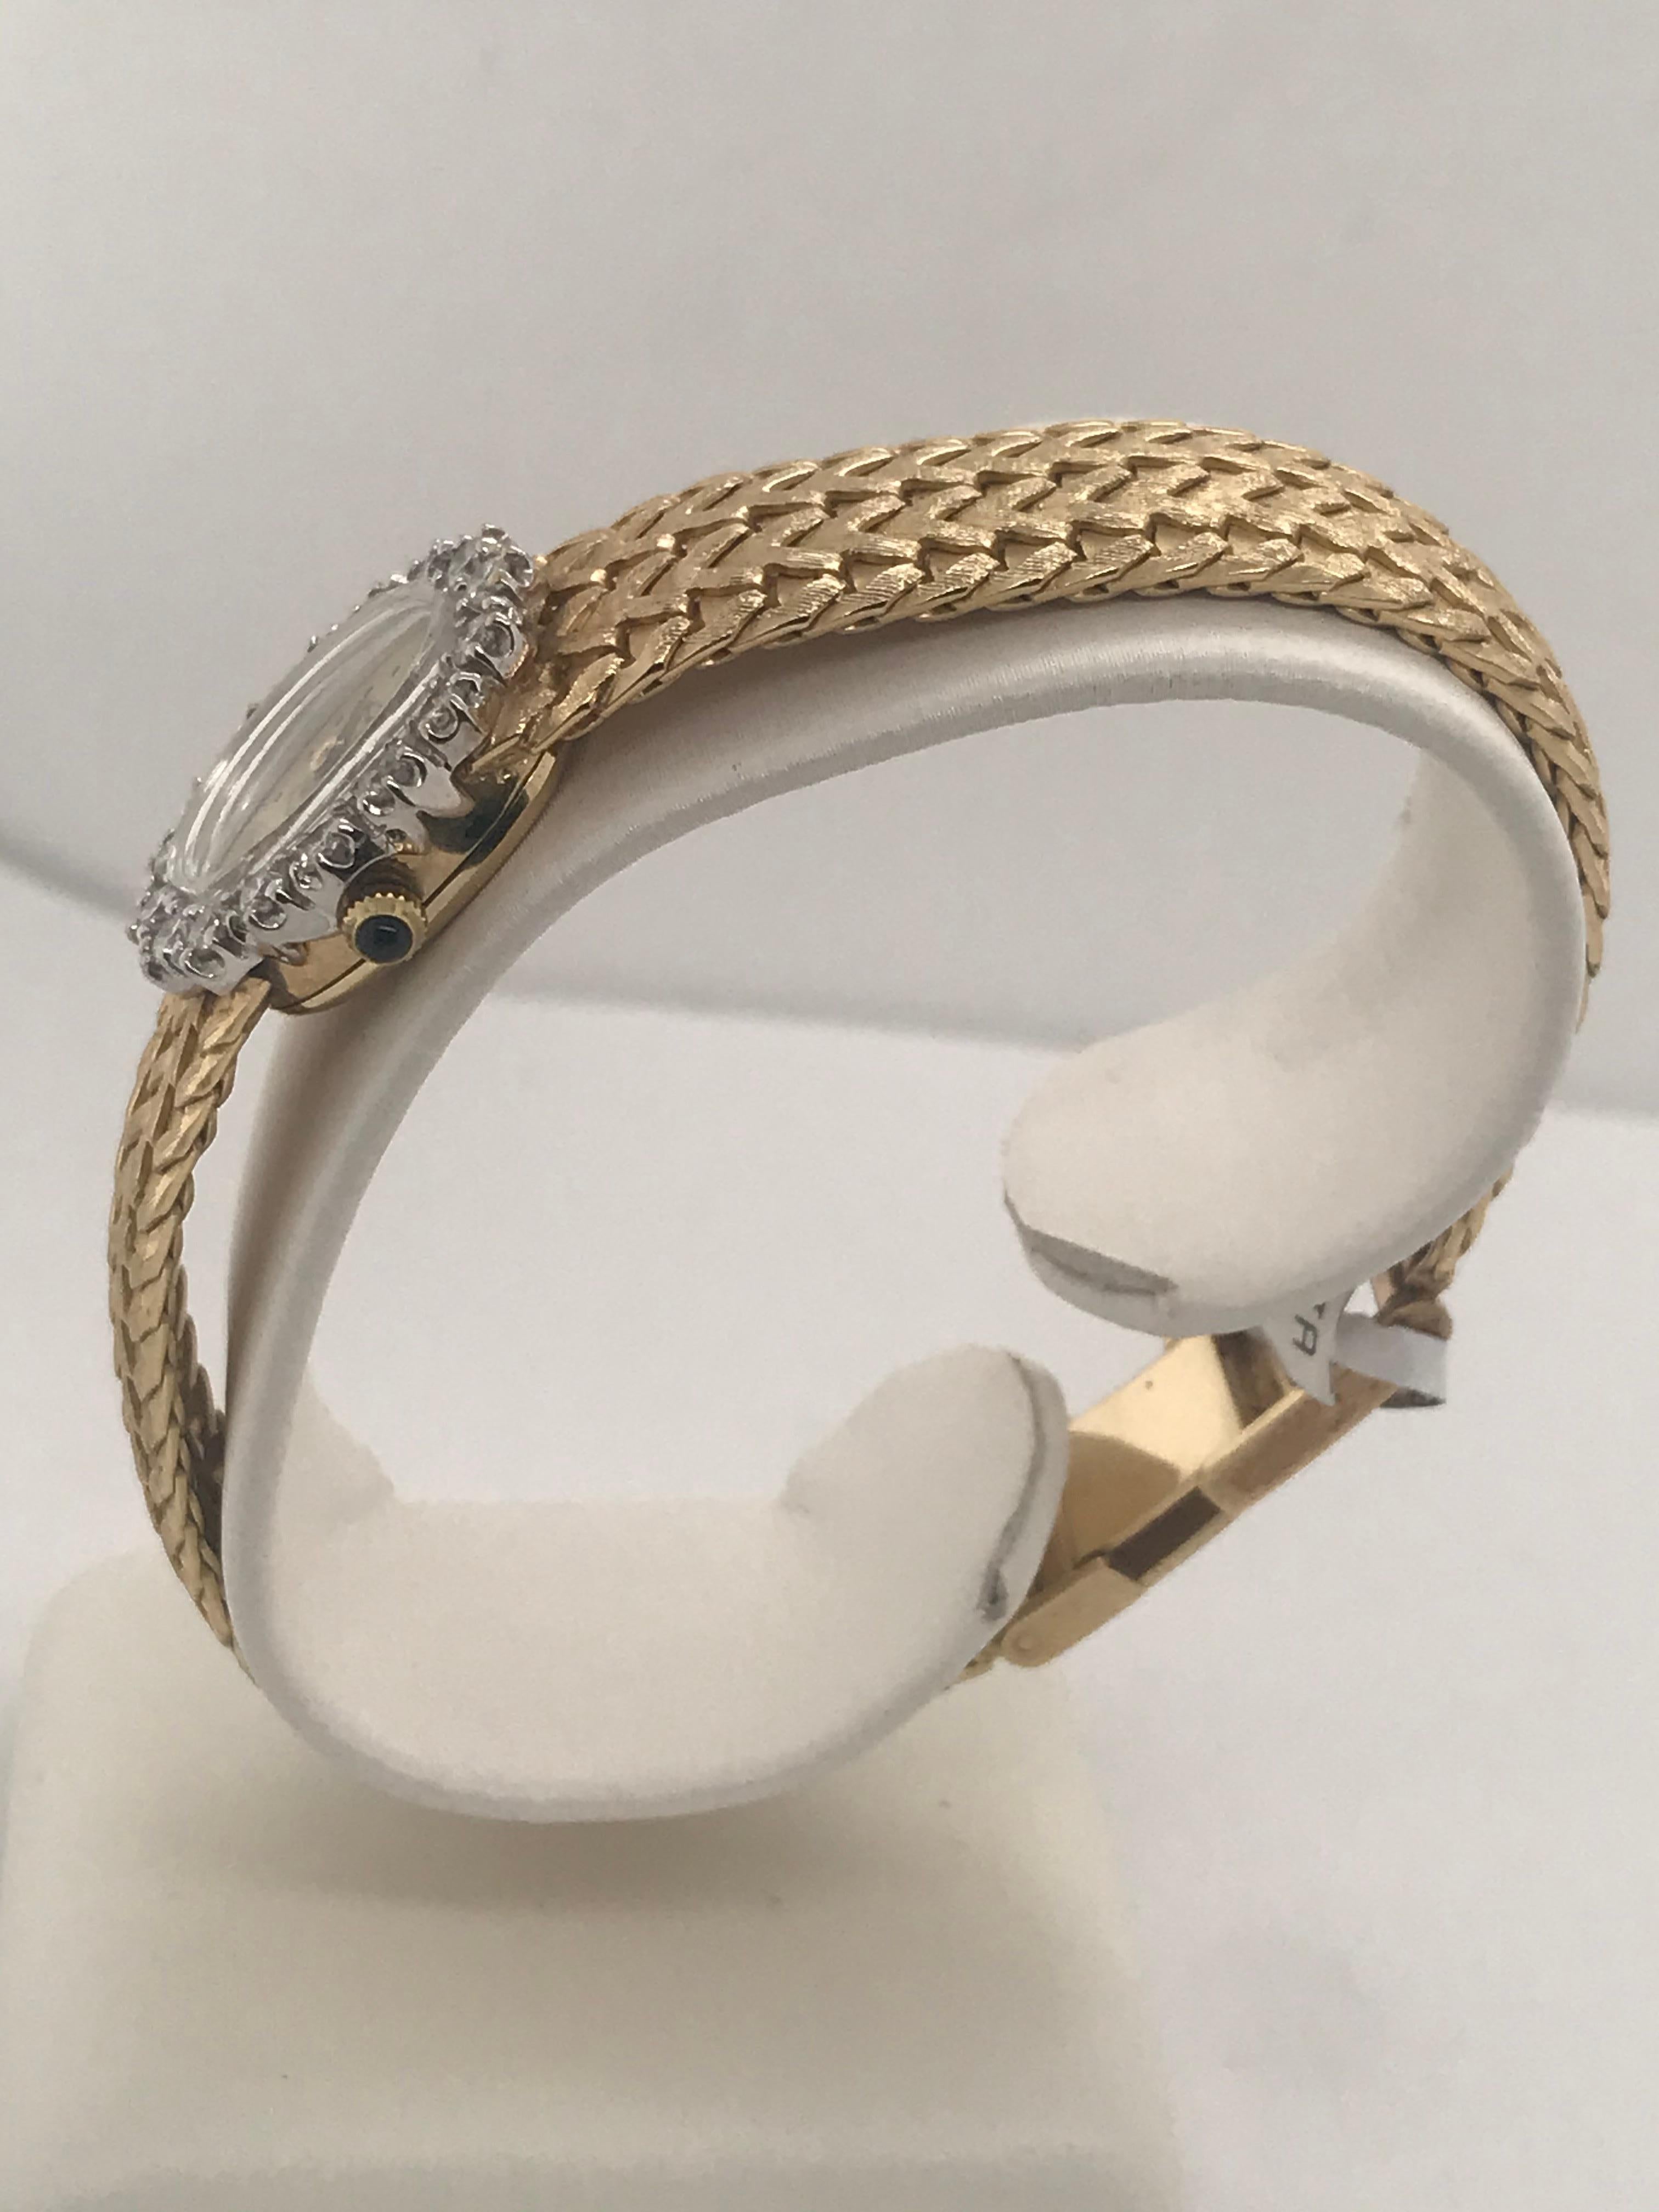 This beautiful Jules Jurgenson 14k  yellow gold watch has 1.00 carat total diamond weight and a very accurate quartz movement.  It has a 2 row chevron bracelet with a easy on-easy off fold over clasp.  It has a timeless elegant design that will